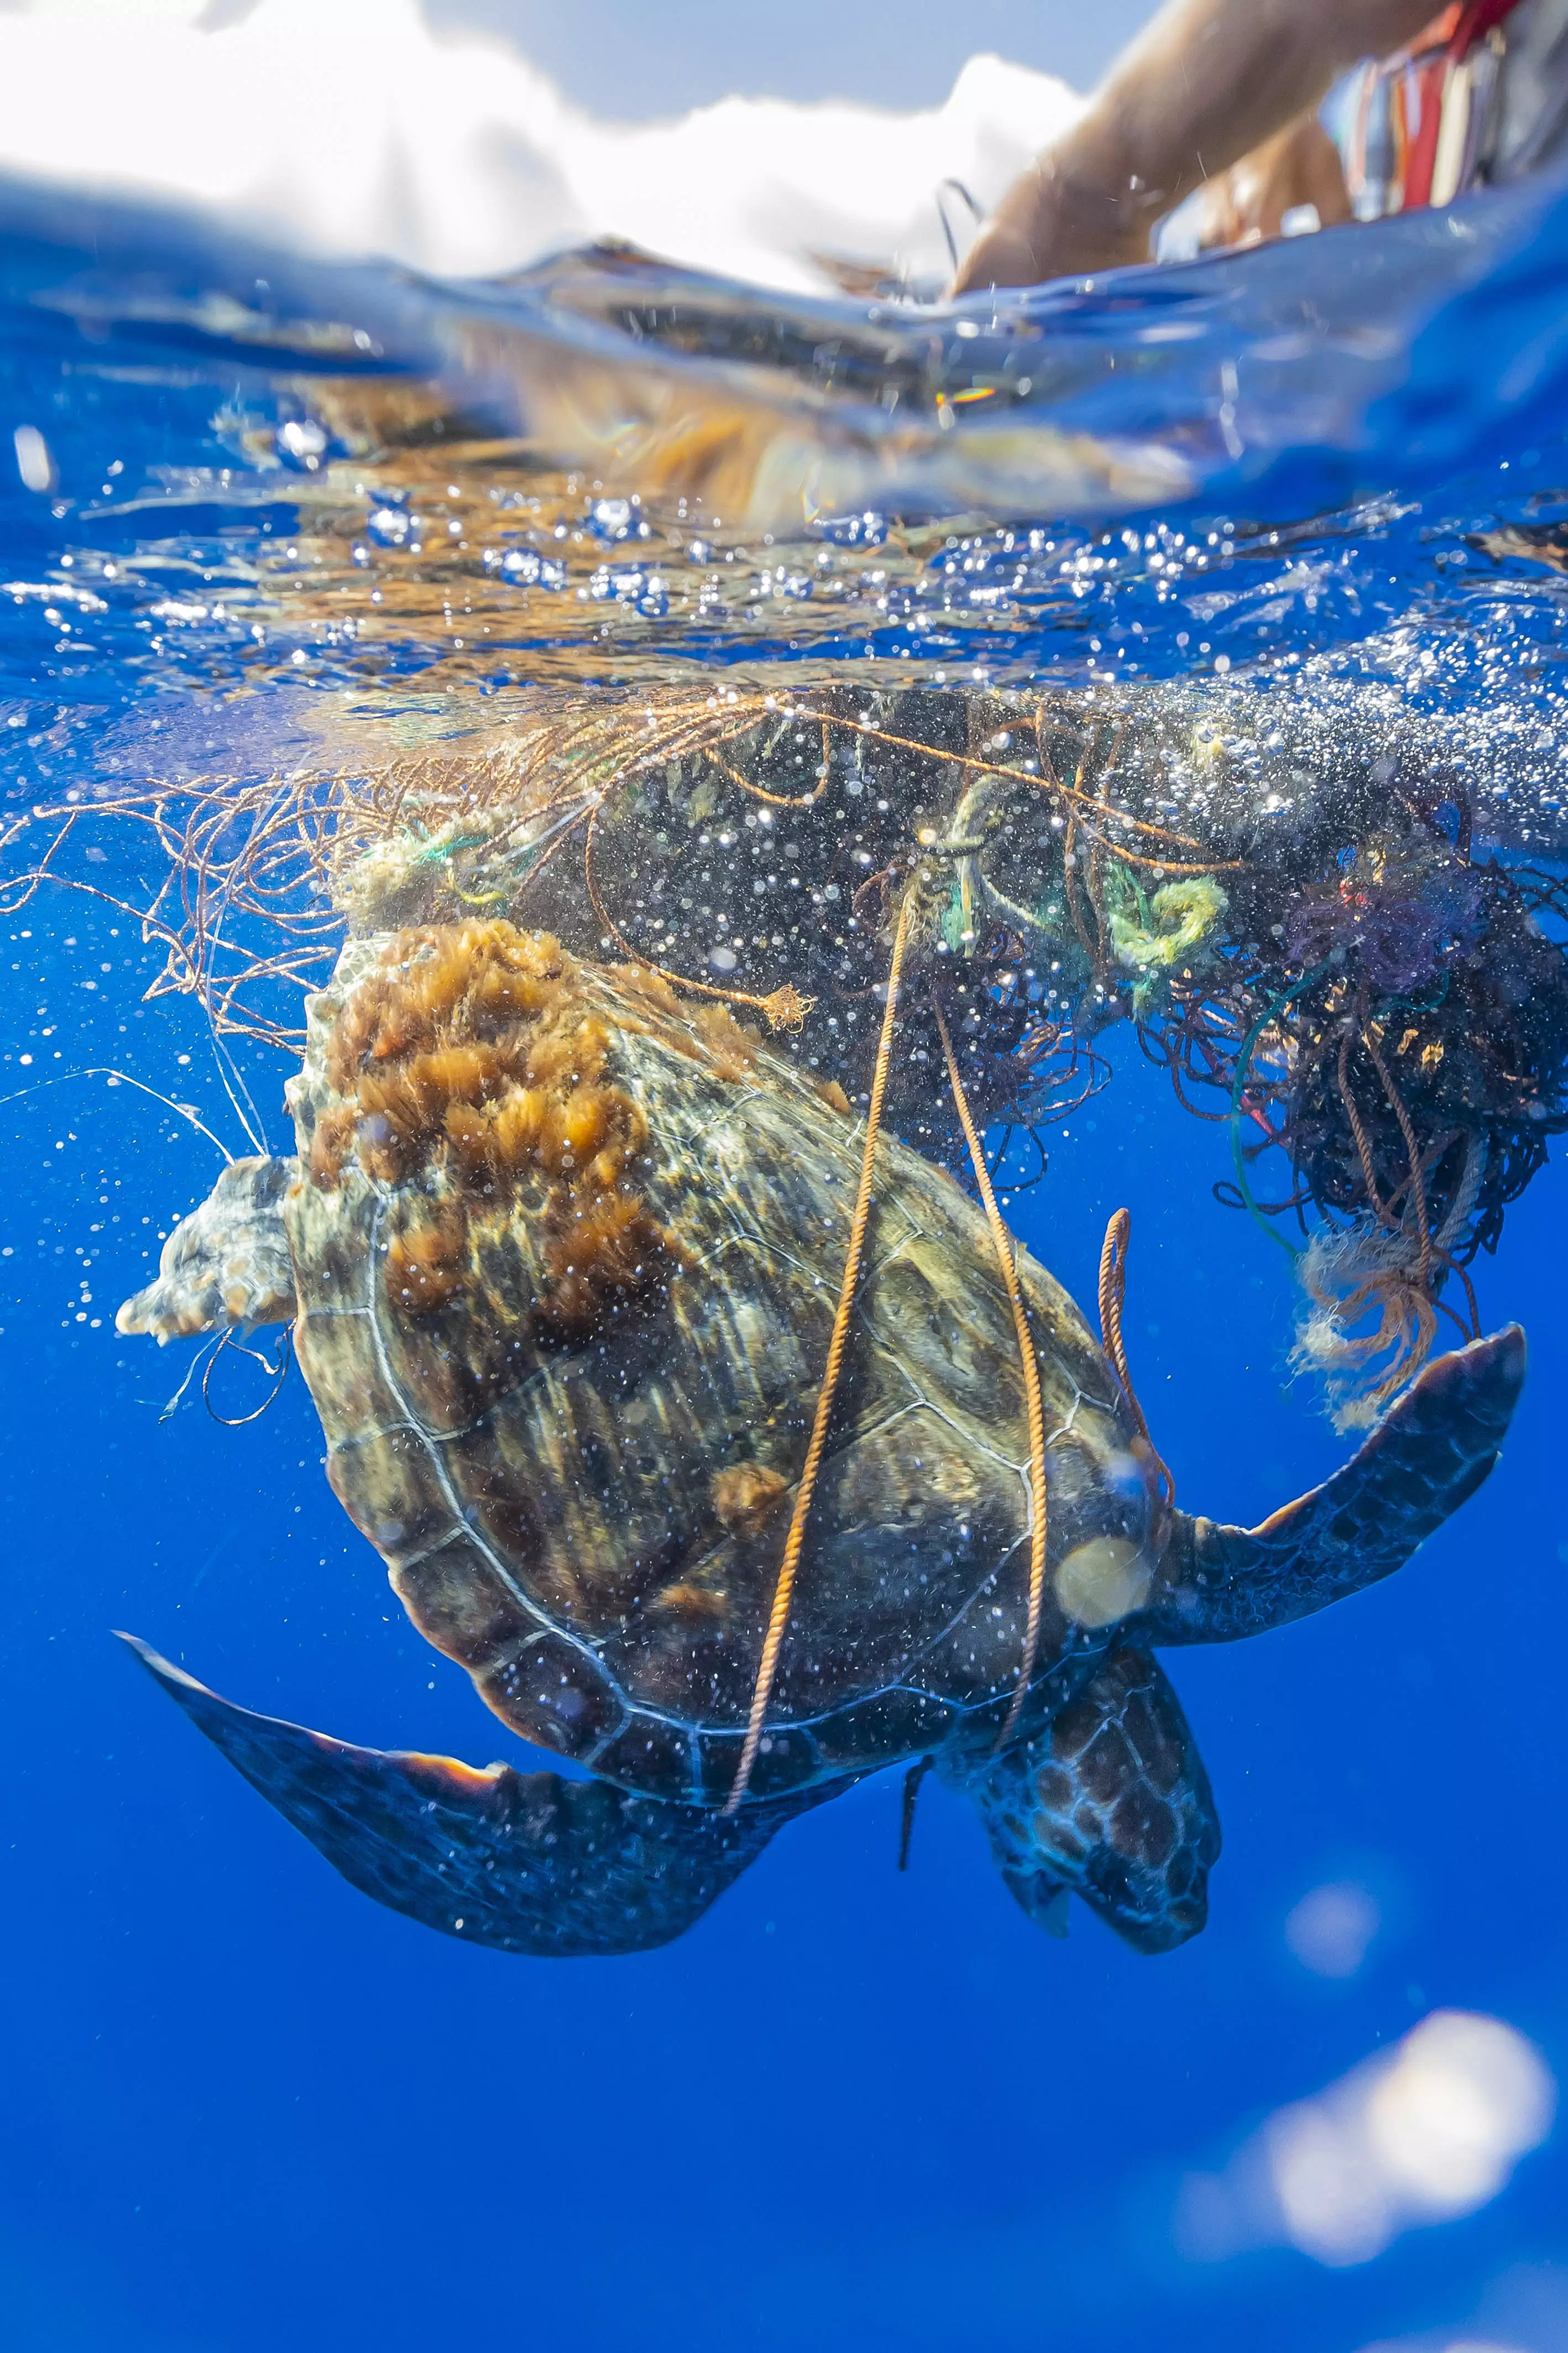 The turtle was trapped in the fishing net.